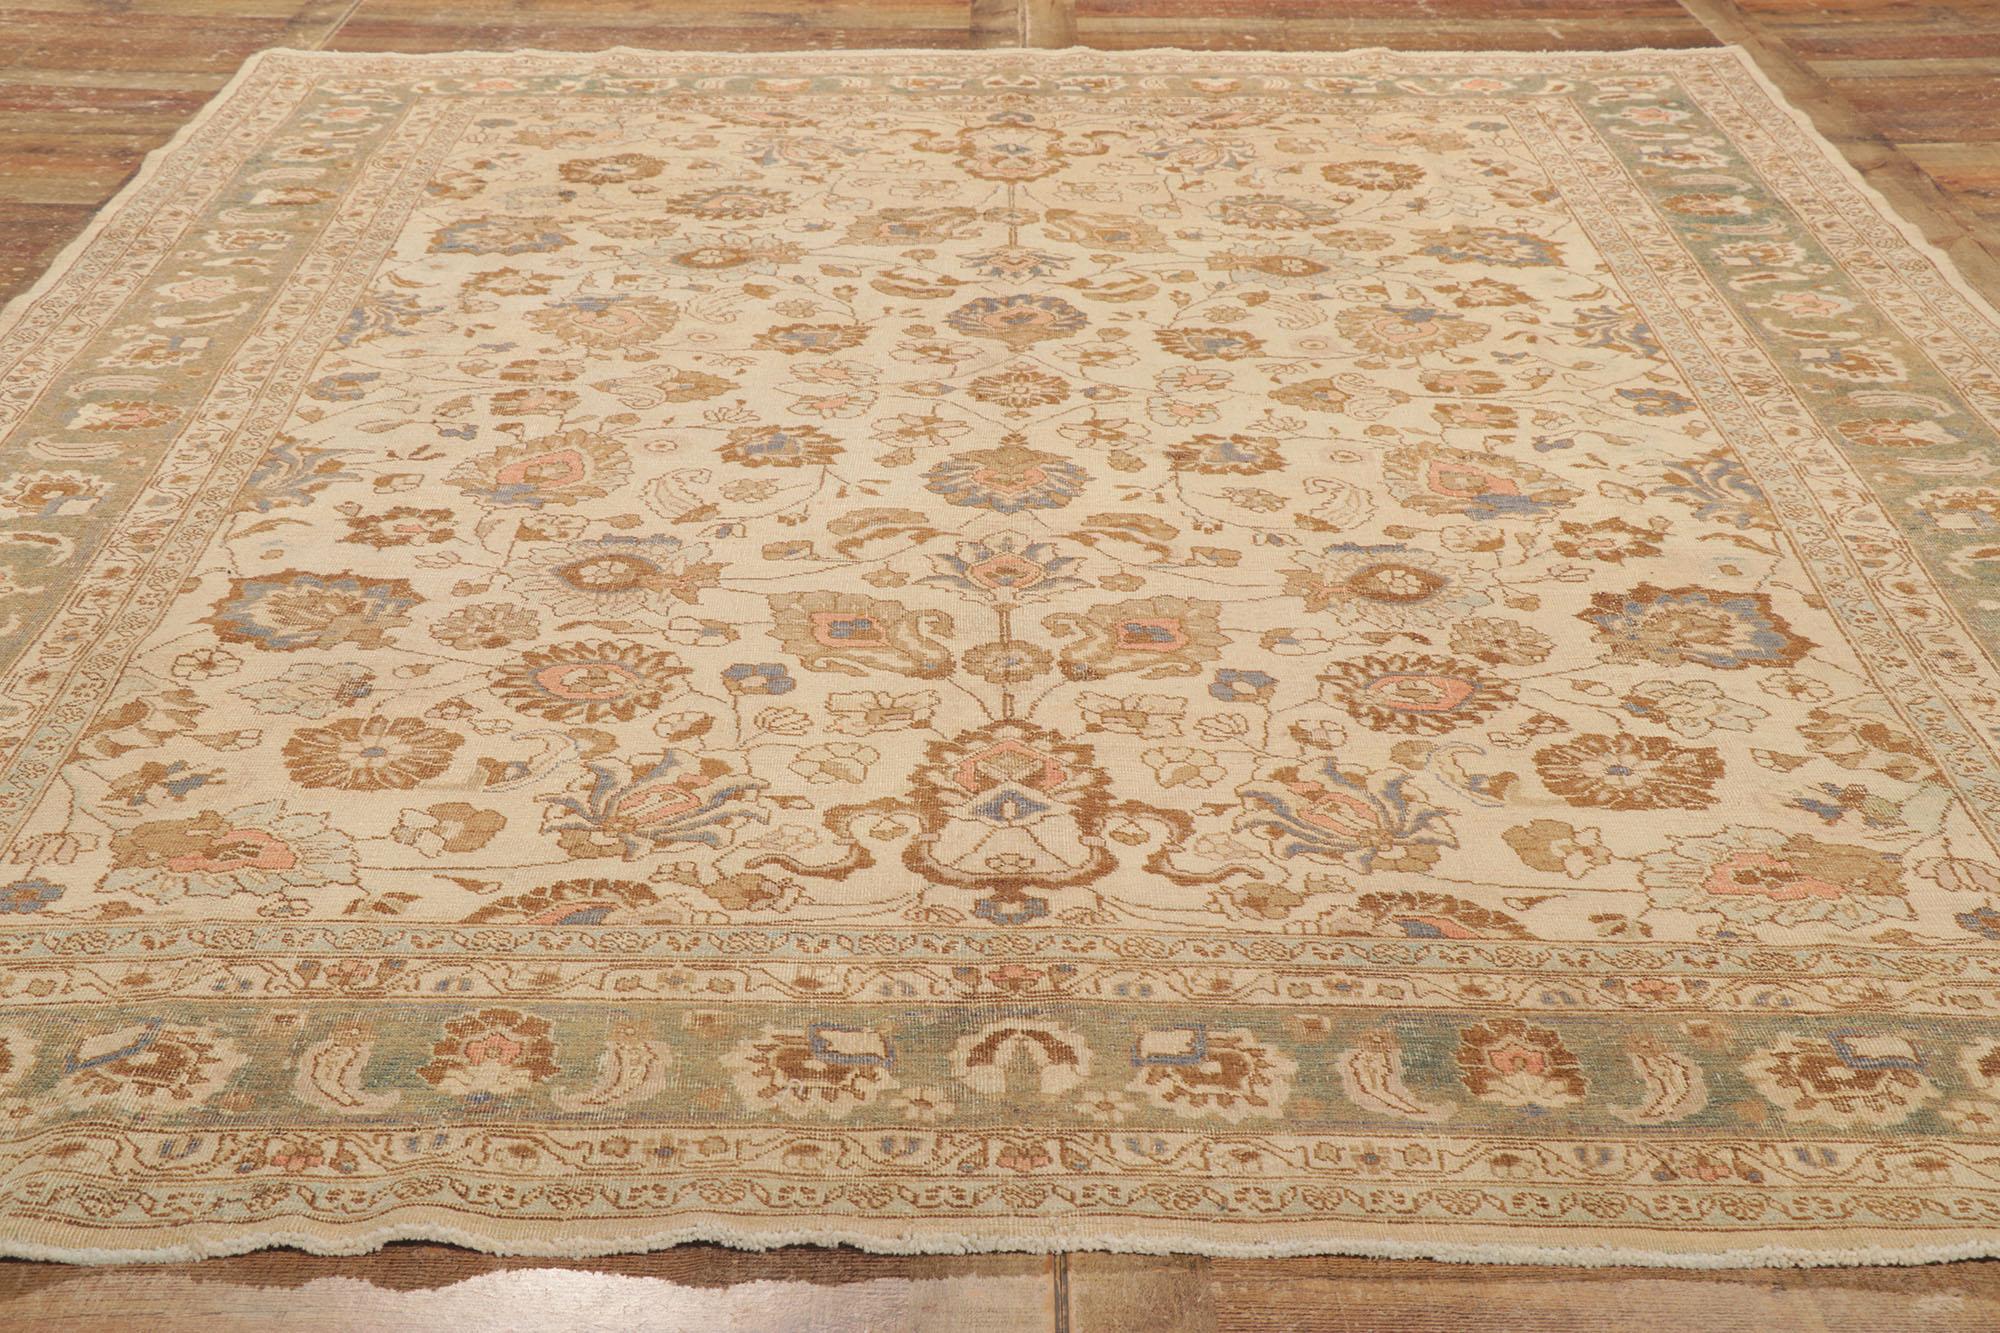 Antique Persian Khorassan Rug with Modern Grandmillennial Style In Good Condition For Sale In Dallas, TX